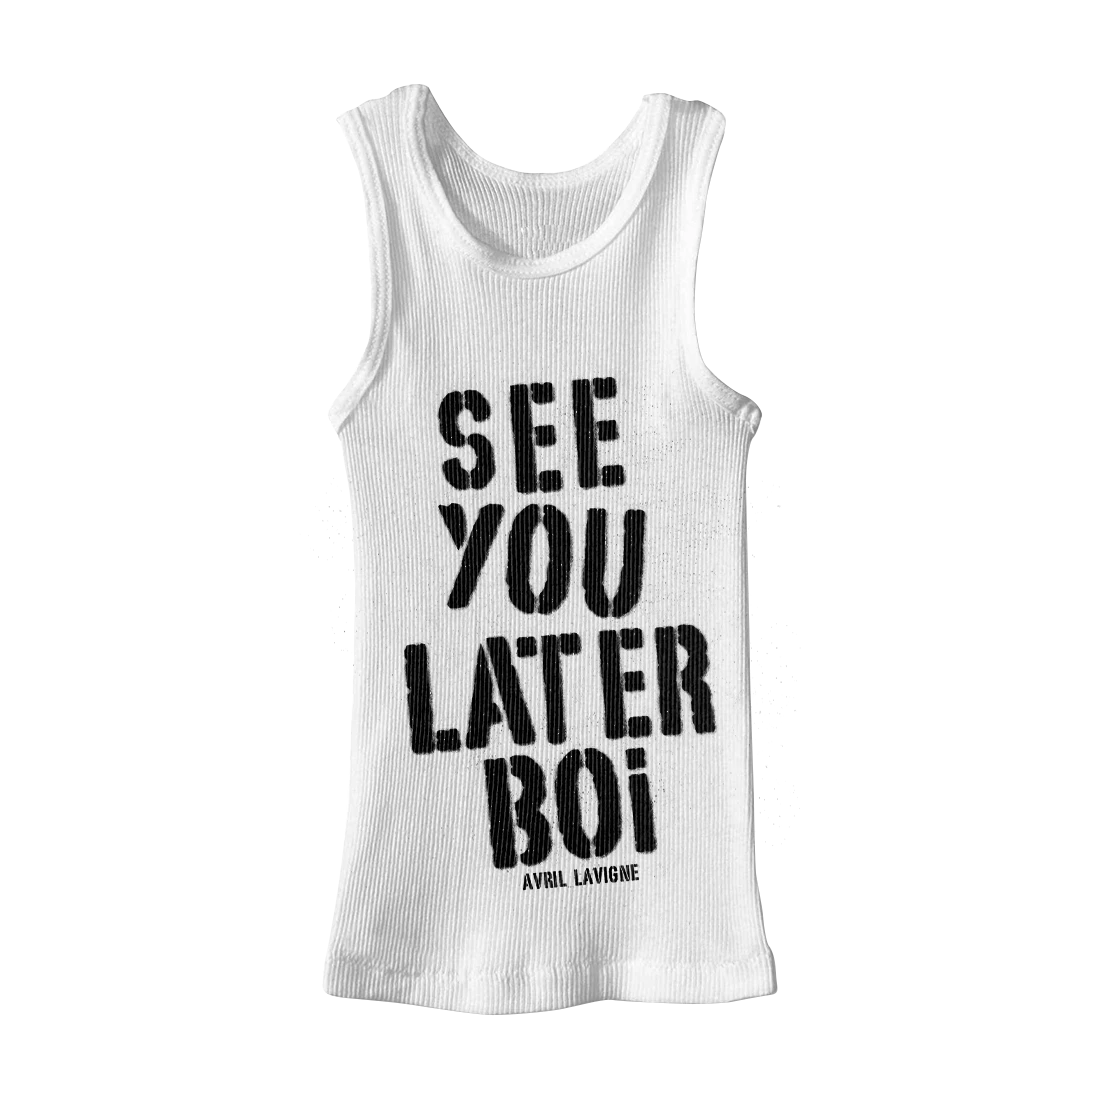 Avril Lavigne - See You Later Boi Tank